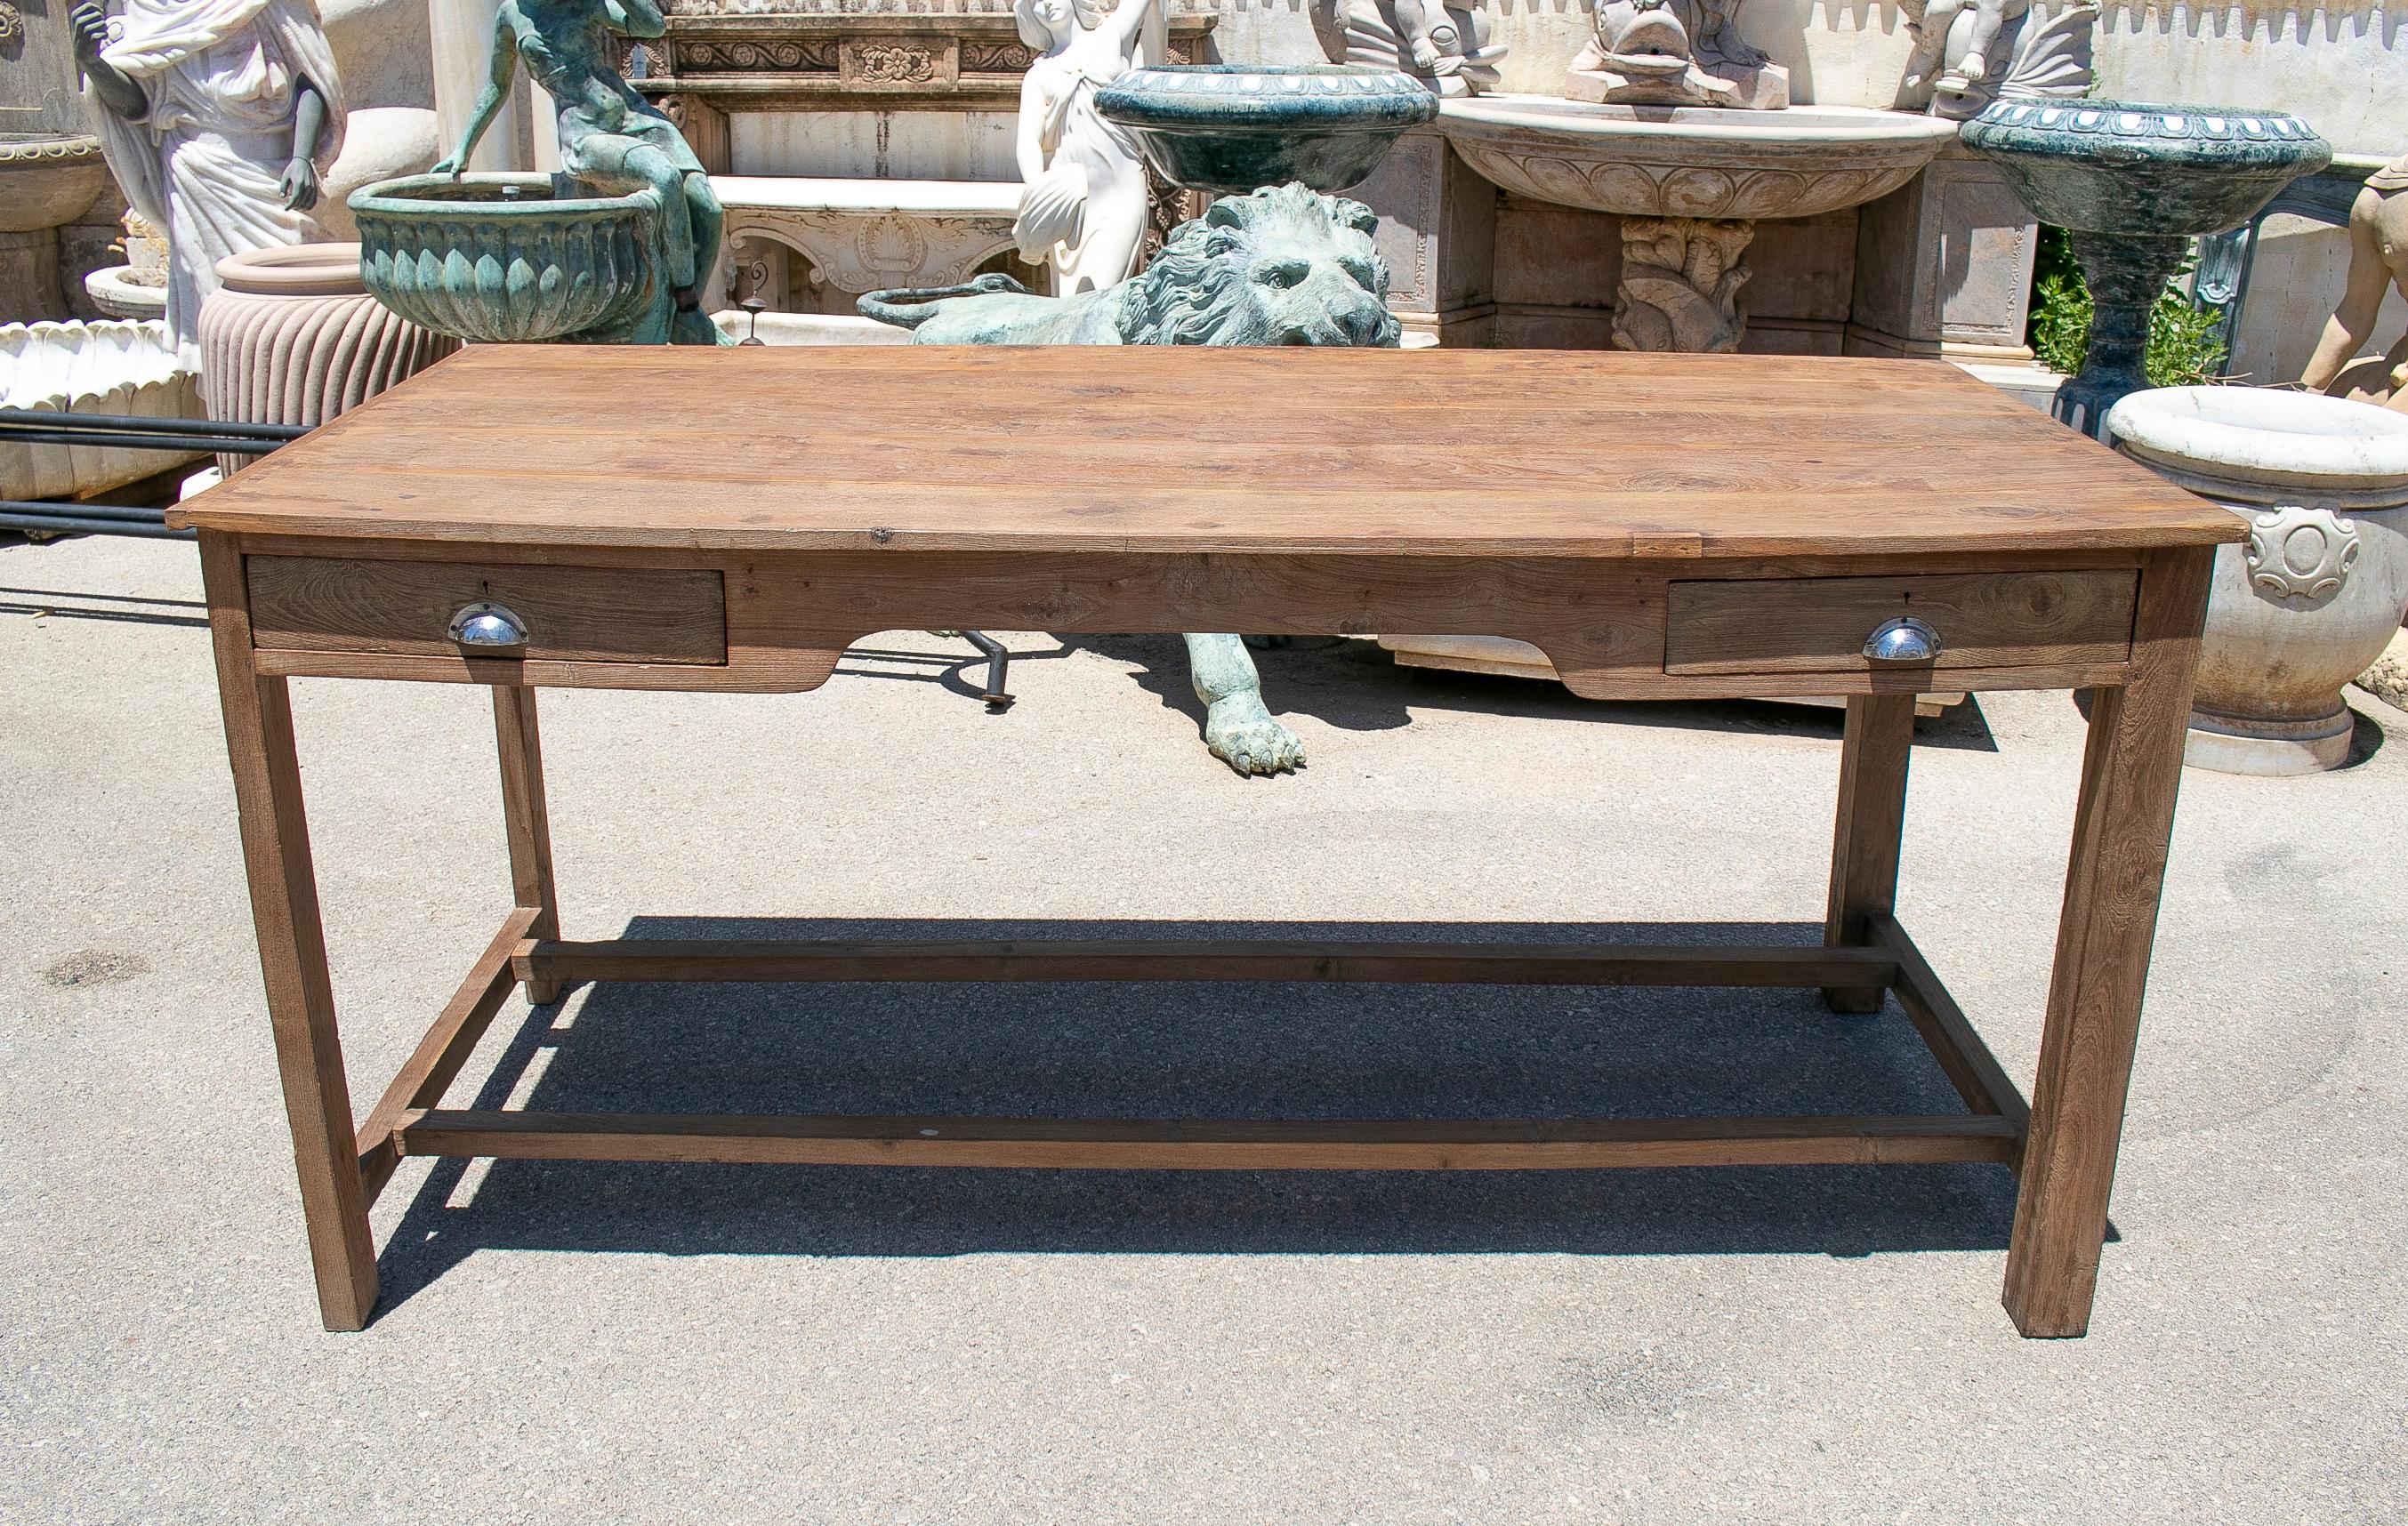 Rustic 1970s Spanish washed wood 2-drawer farmhouse table with crossbeam legs.